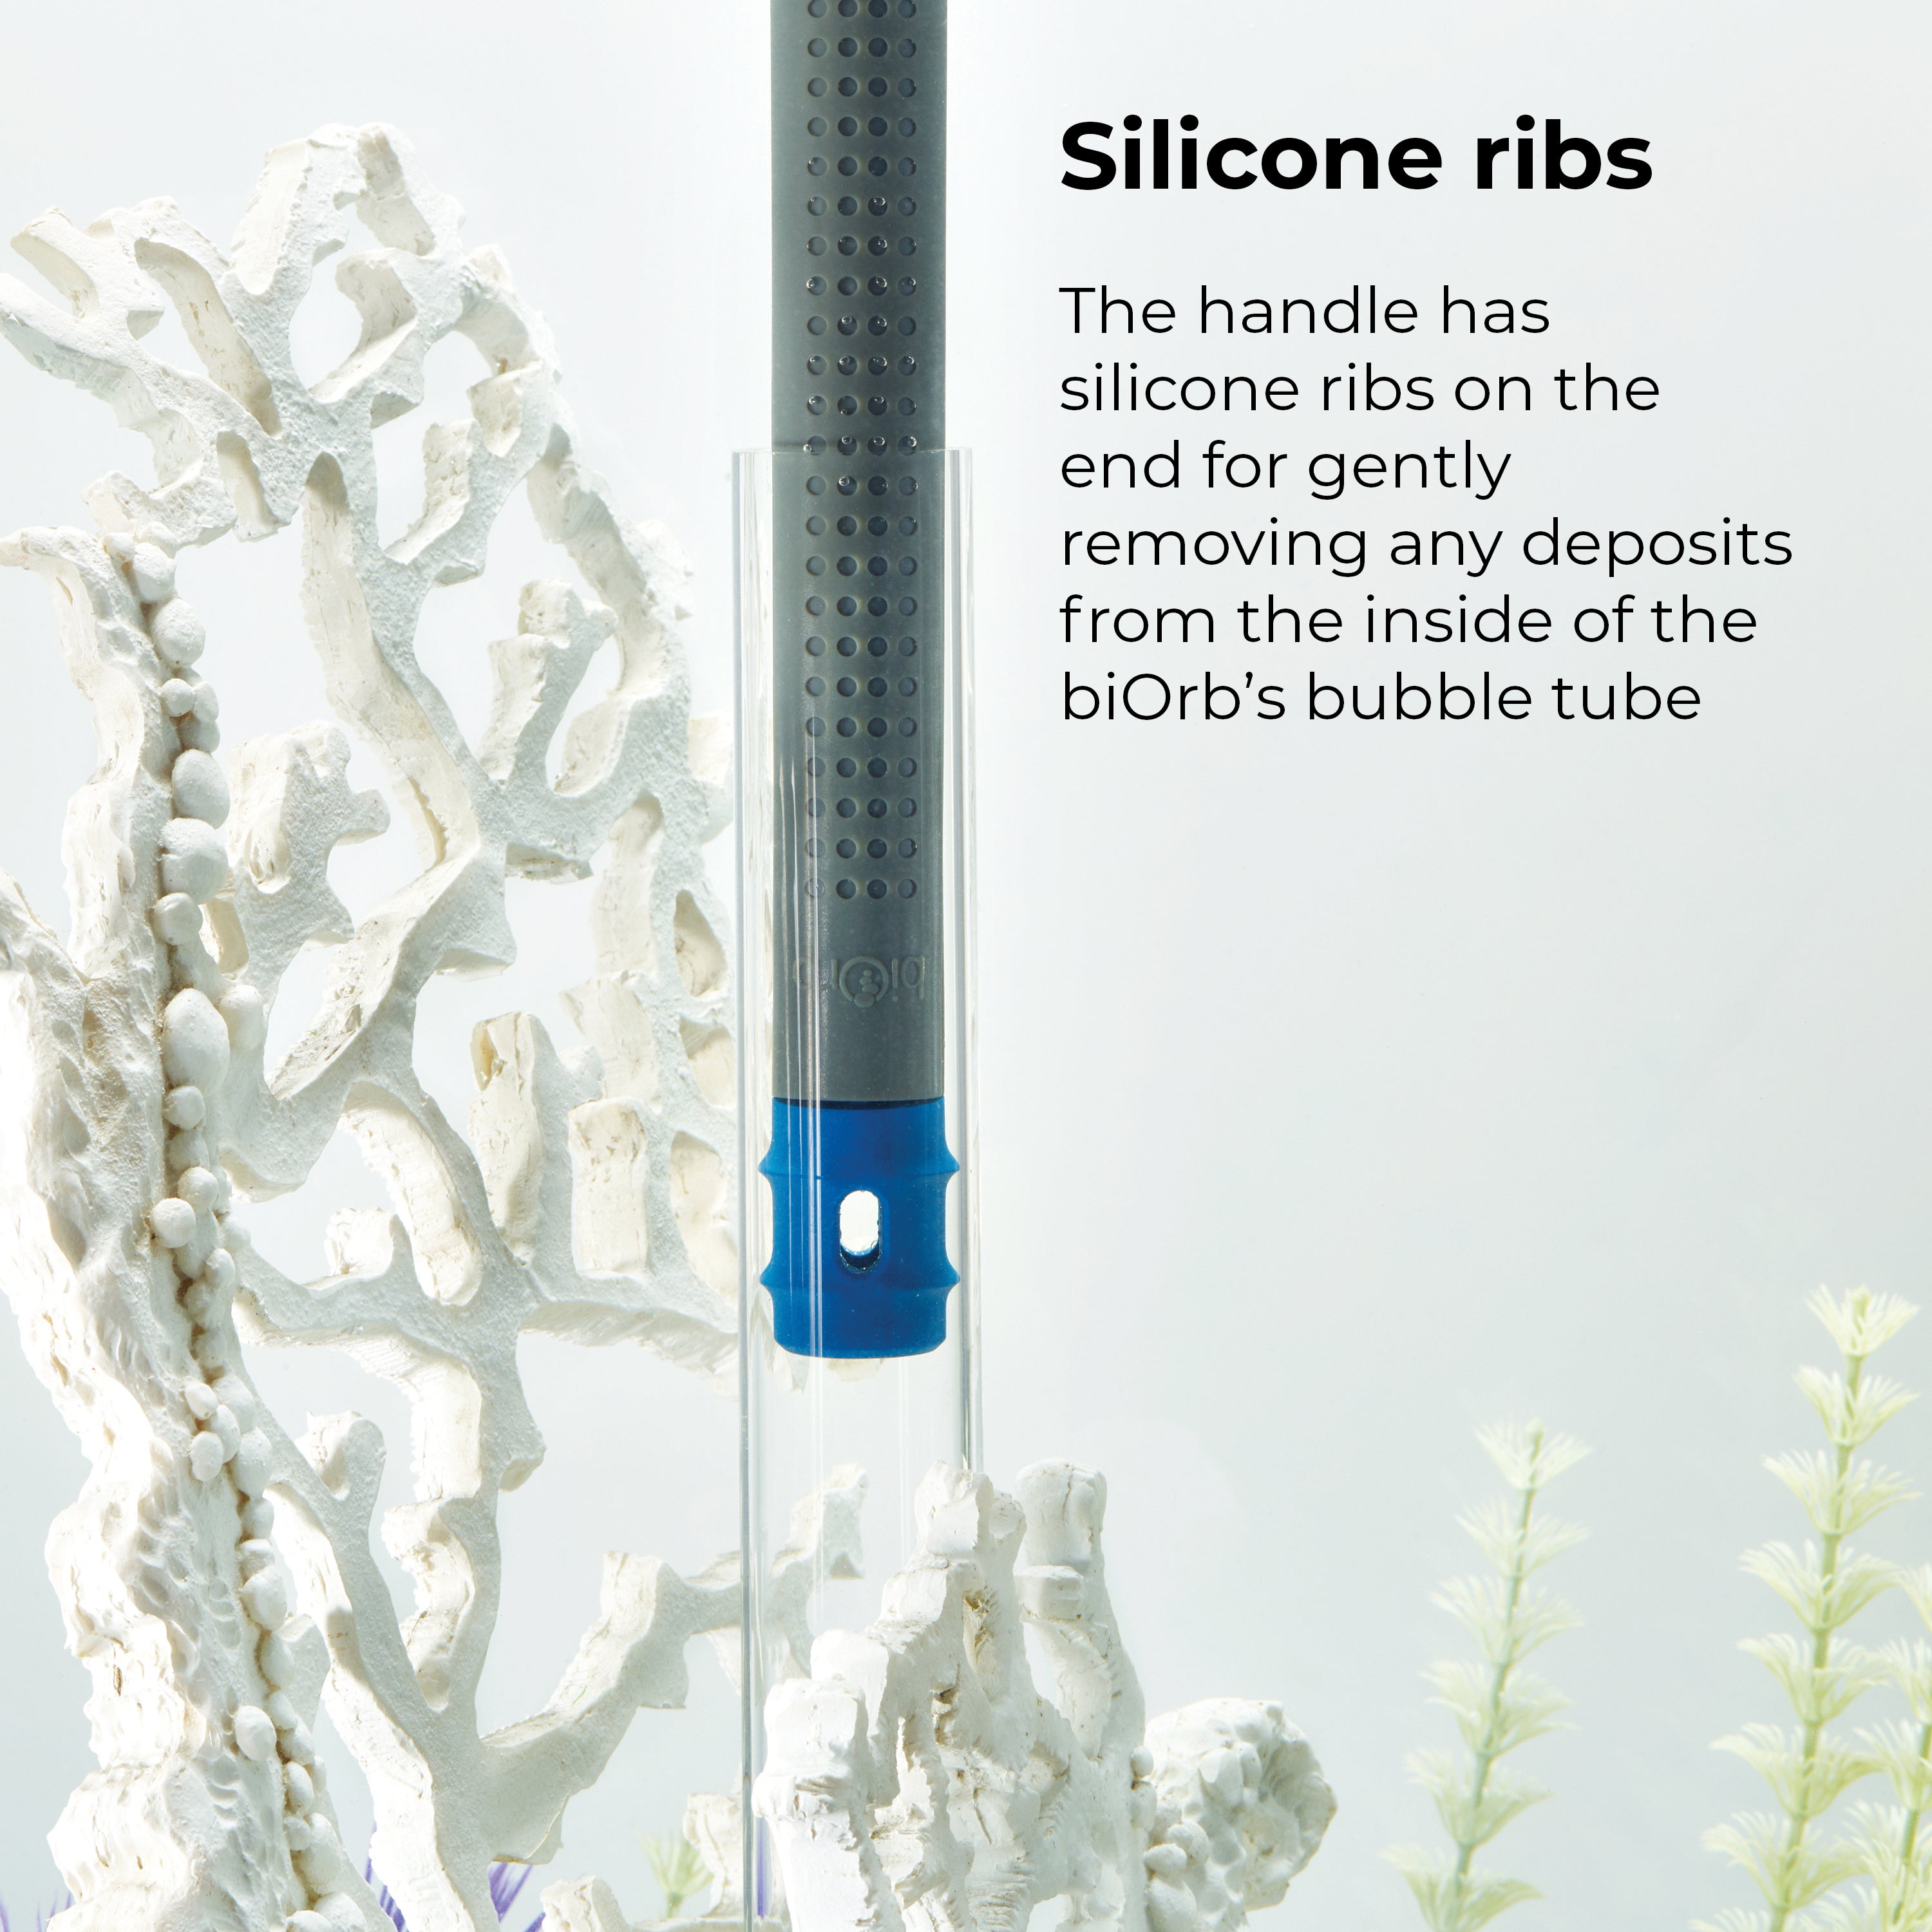 Multi-Cleaning Tool - Silicone ribs